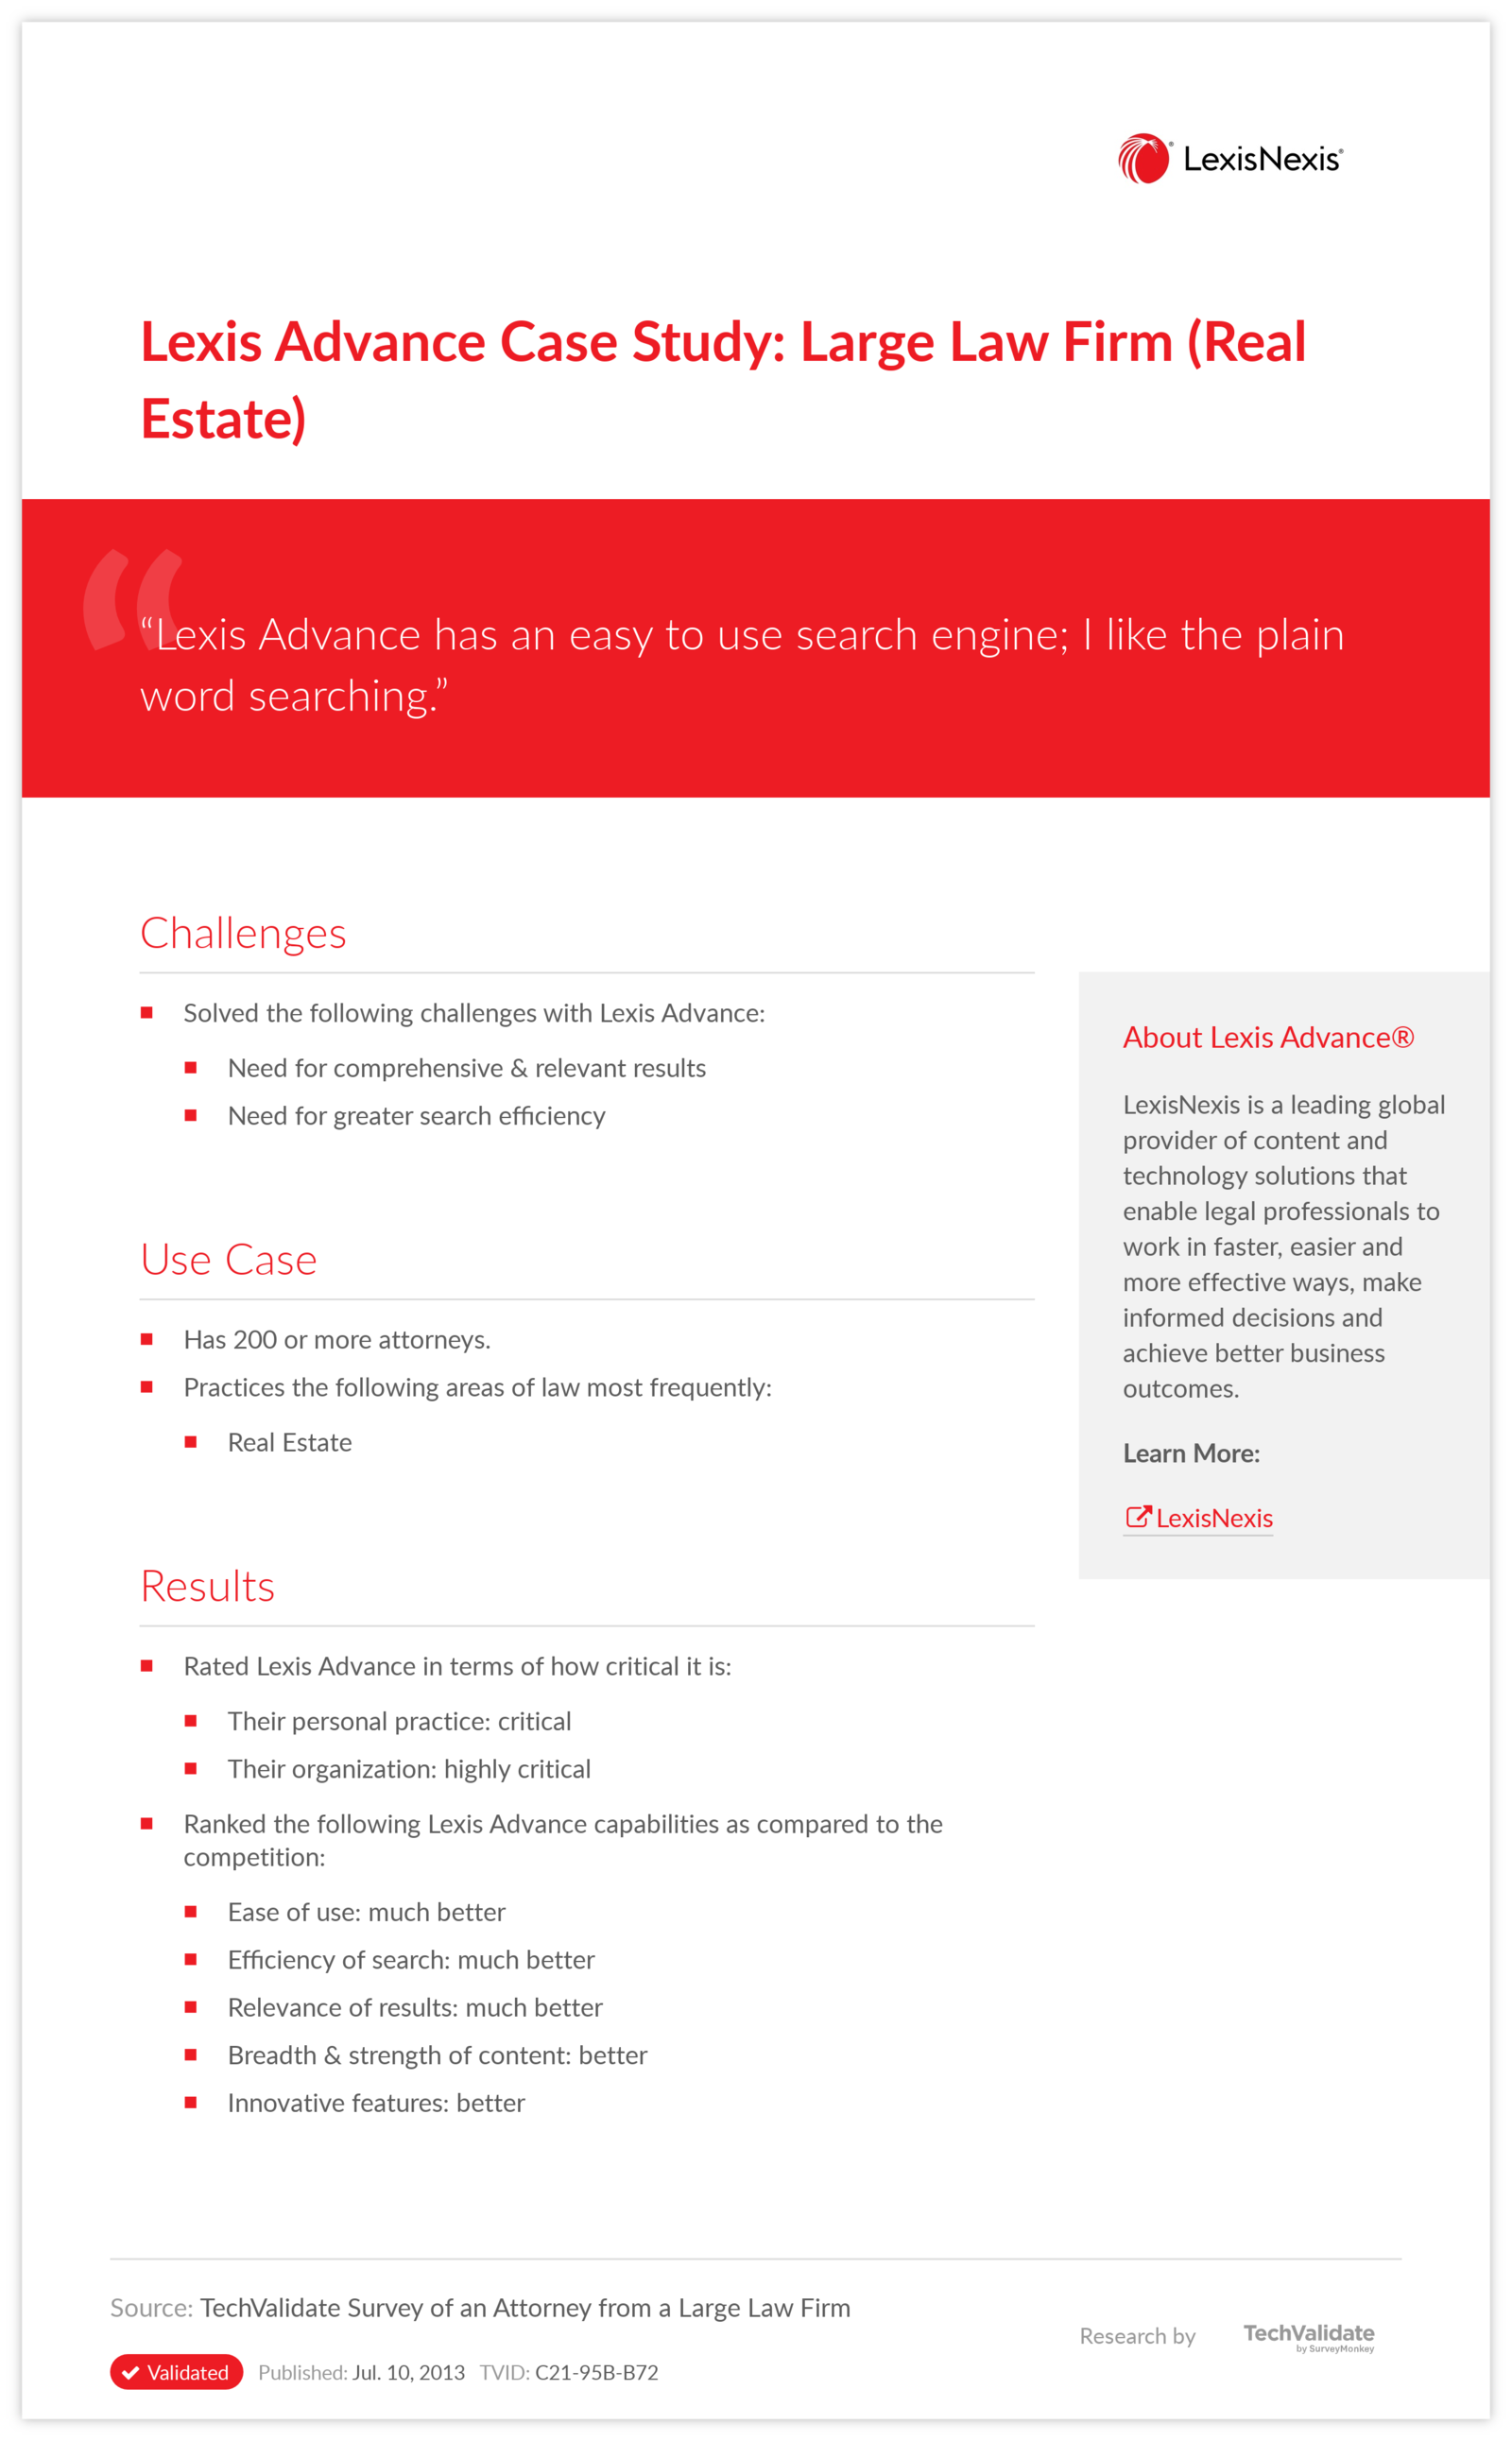 Lexis Advance Case Study: Large Law Firm (Real Estate)